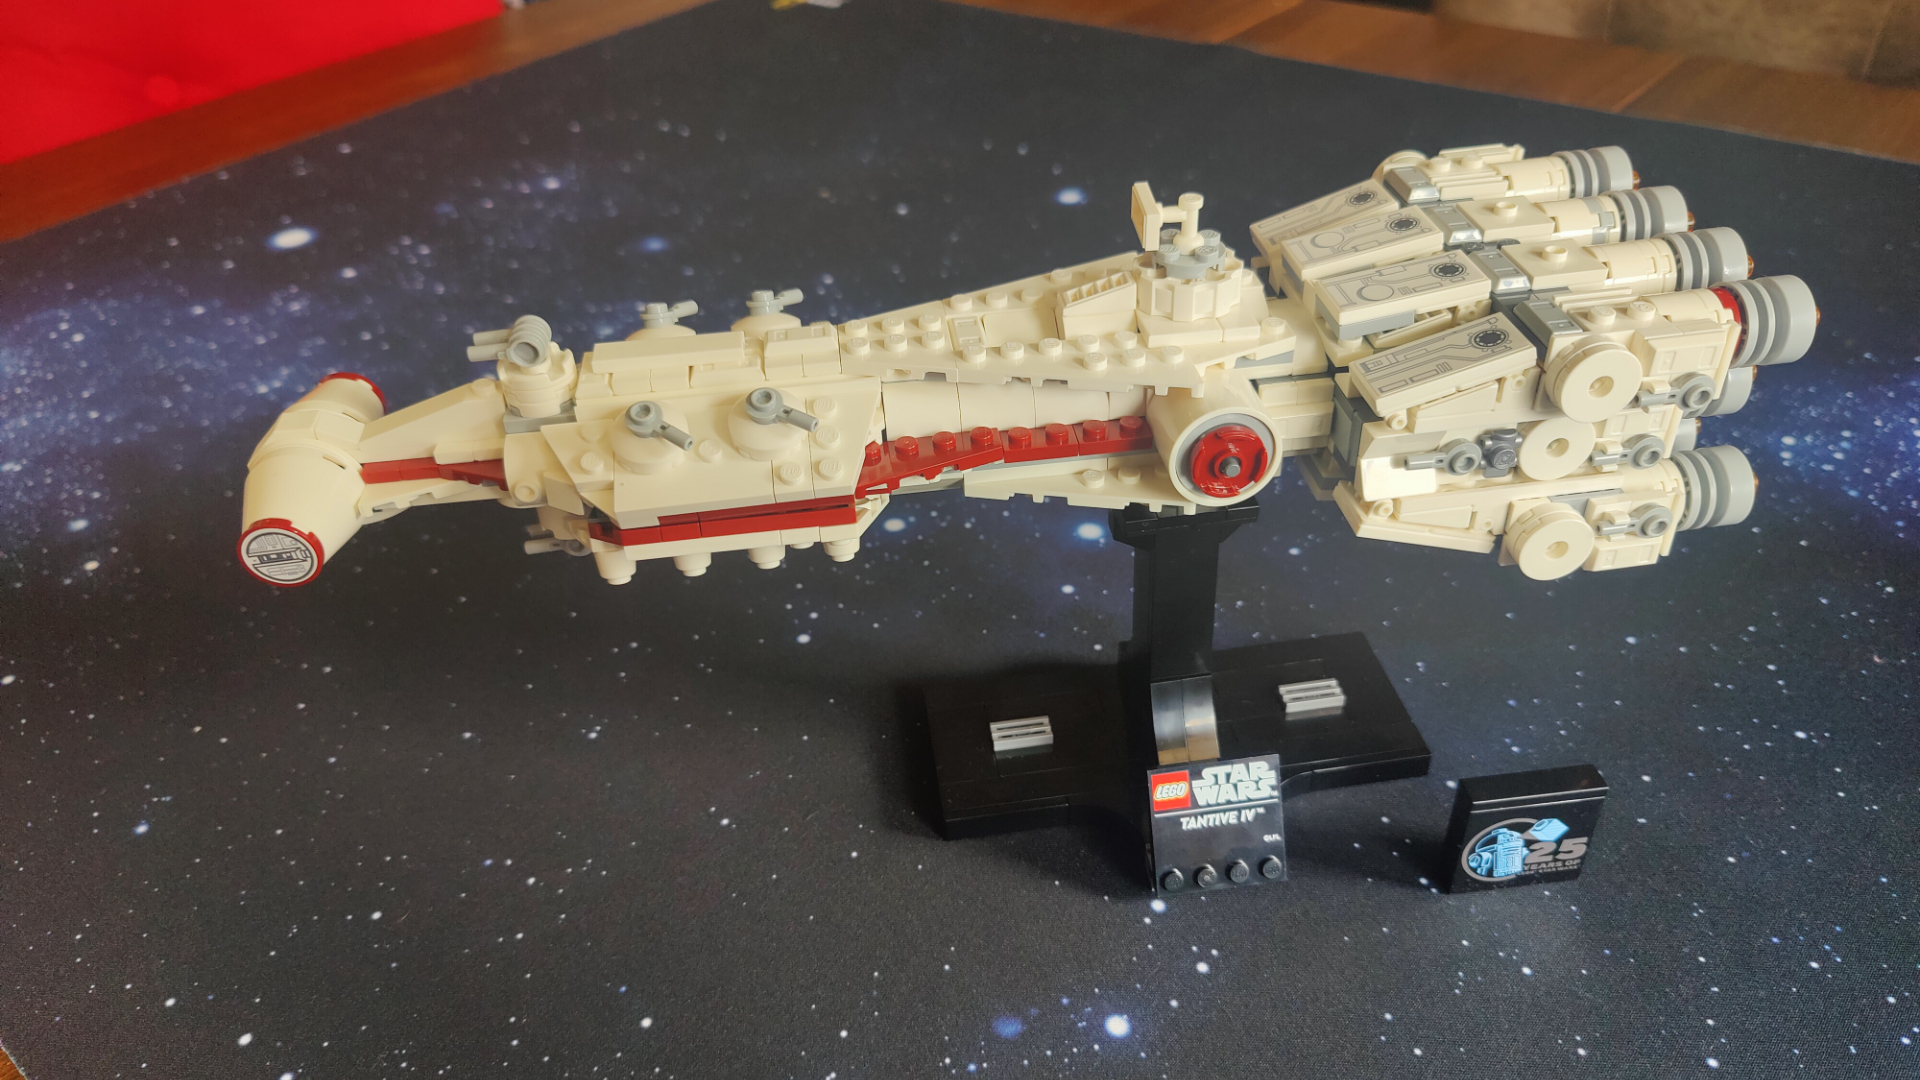 Lego Star Wars Tantive IV review Space